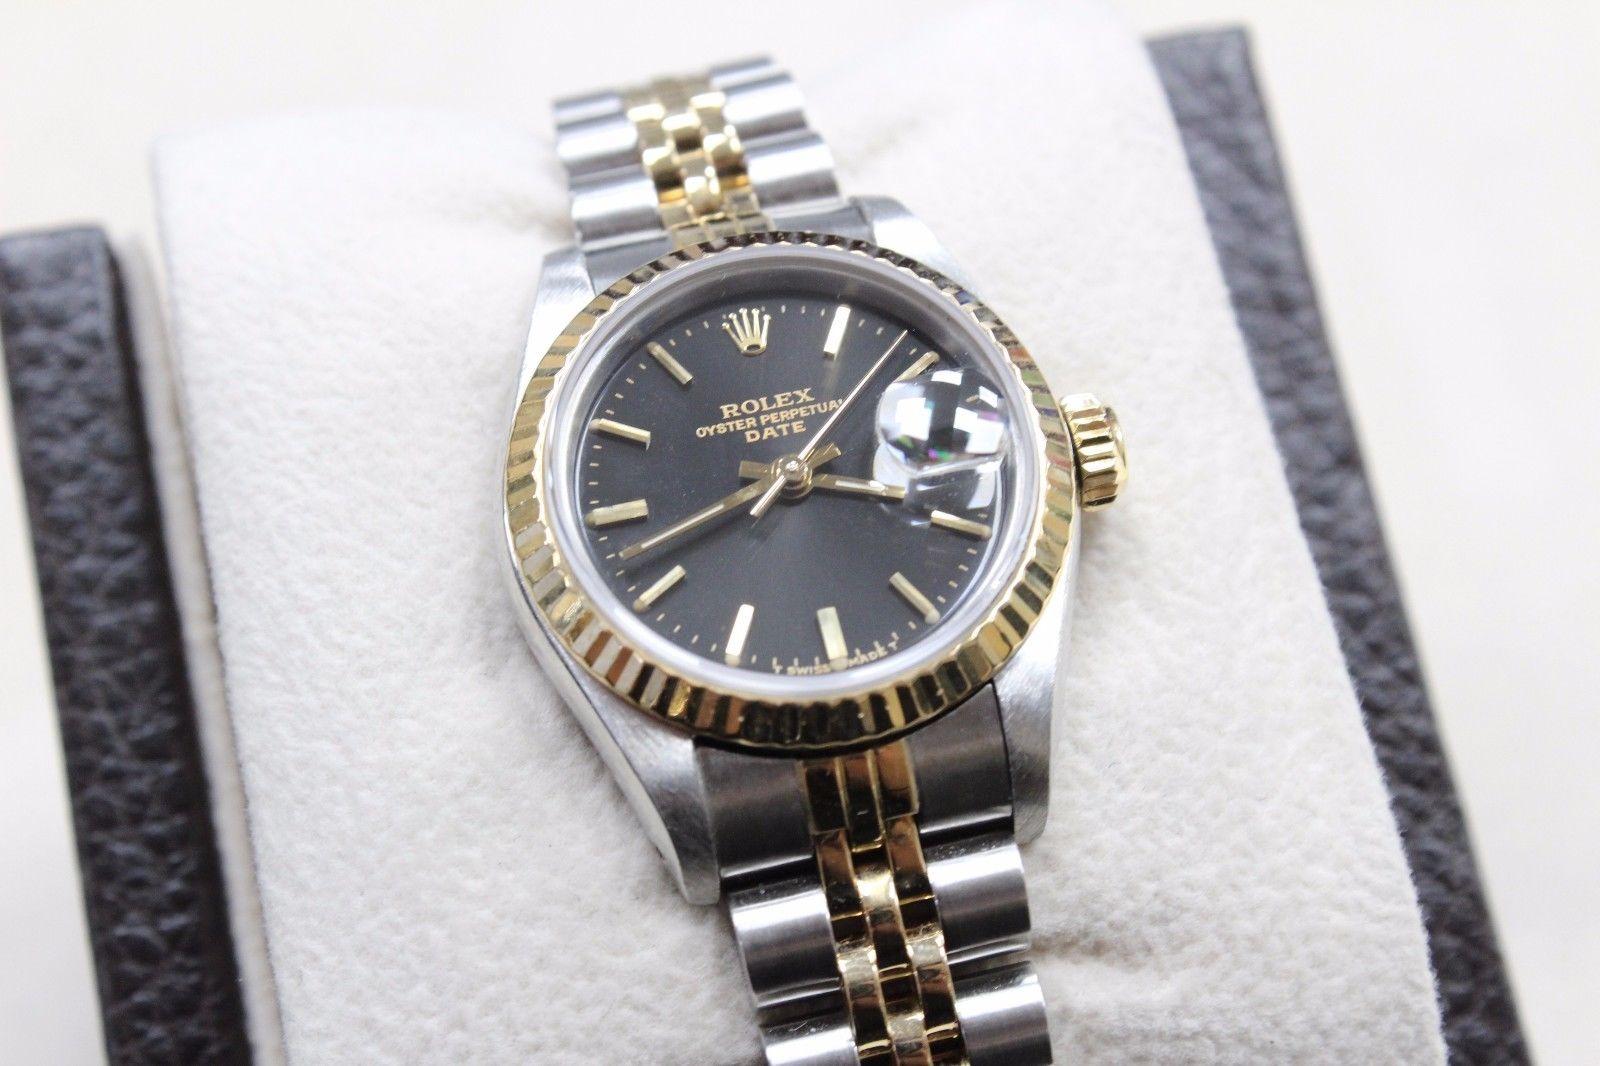 Style Number: 69173

Model: Date

Case Material: Stainless Steel 

Band: 18K Yellow Gold & Stainless Steel 

Bezel: 18K Yellow Gold

Dial: Black

Face: Sapphire Crystal 

Case Size: 26mm

Includes: 

-Rolex Watch Box & Papers

-Certified Appraisal